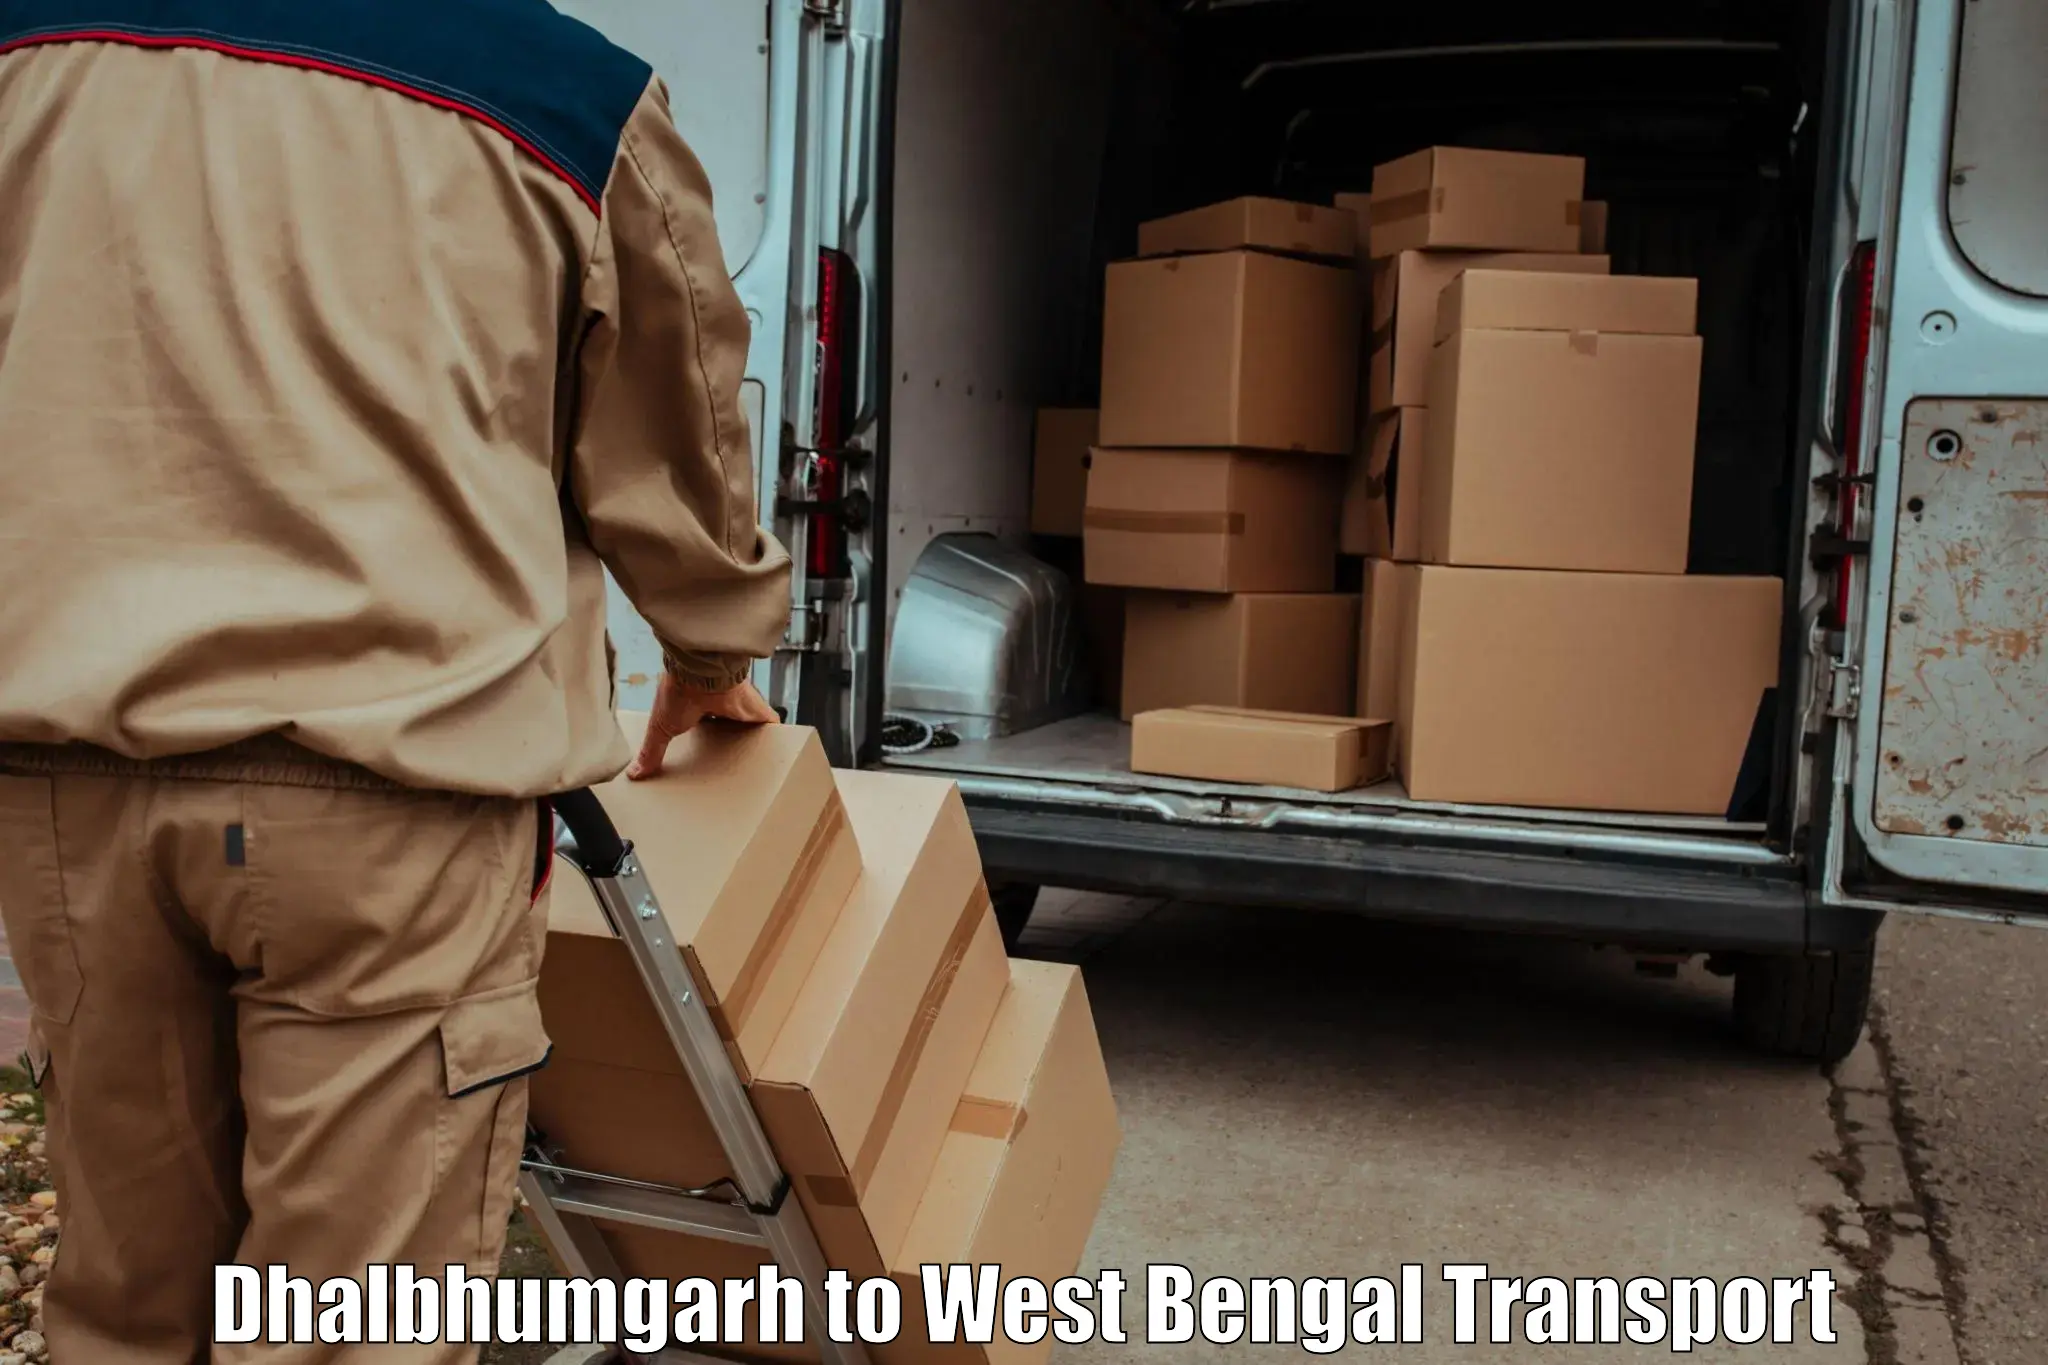 Package delivery services Dhalbhumgarh to Bolpur